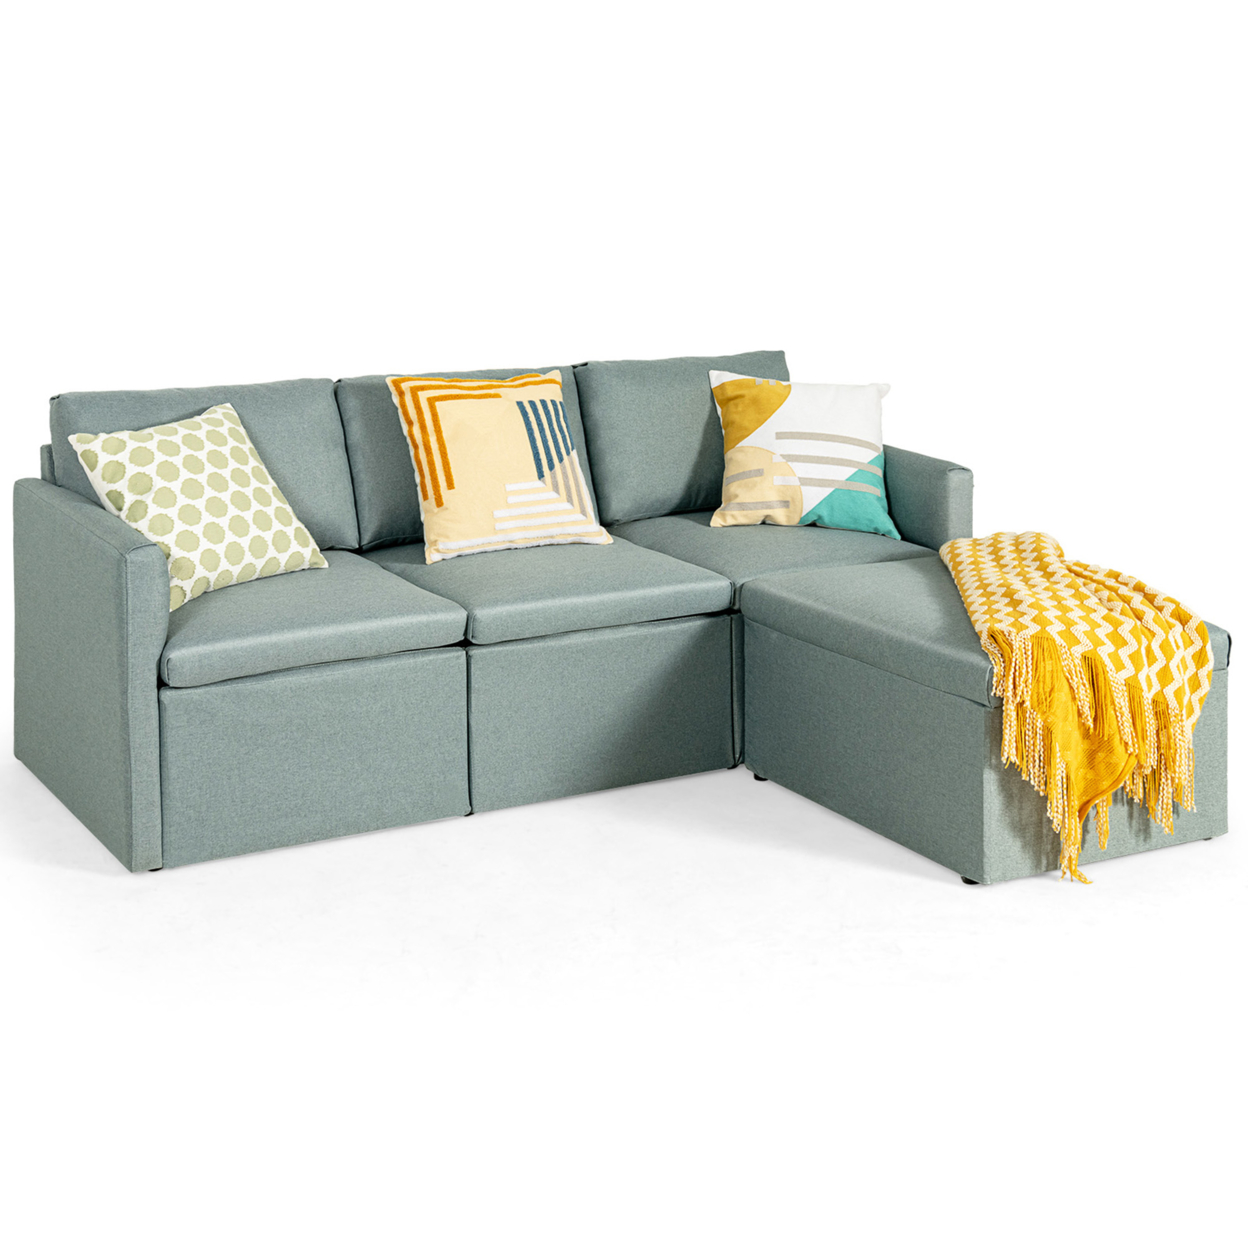 Convertible L-shaped Sectional Sofa Couch Chaise W/ Ottoman Cushions - Green